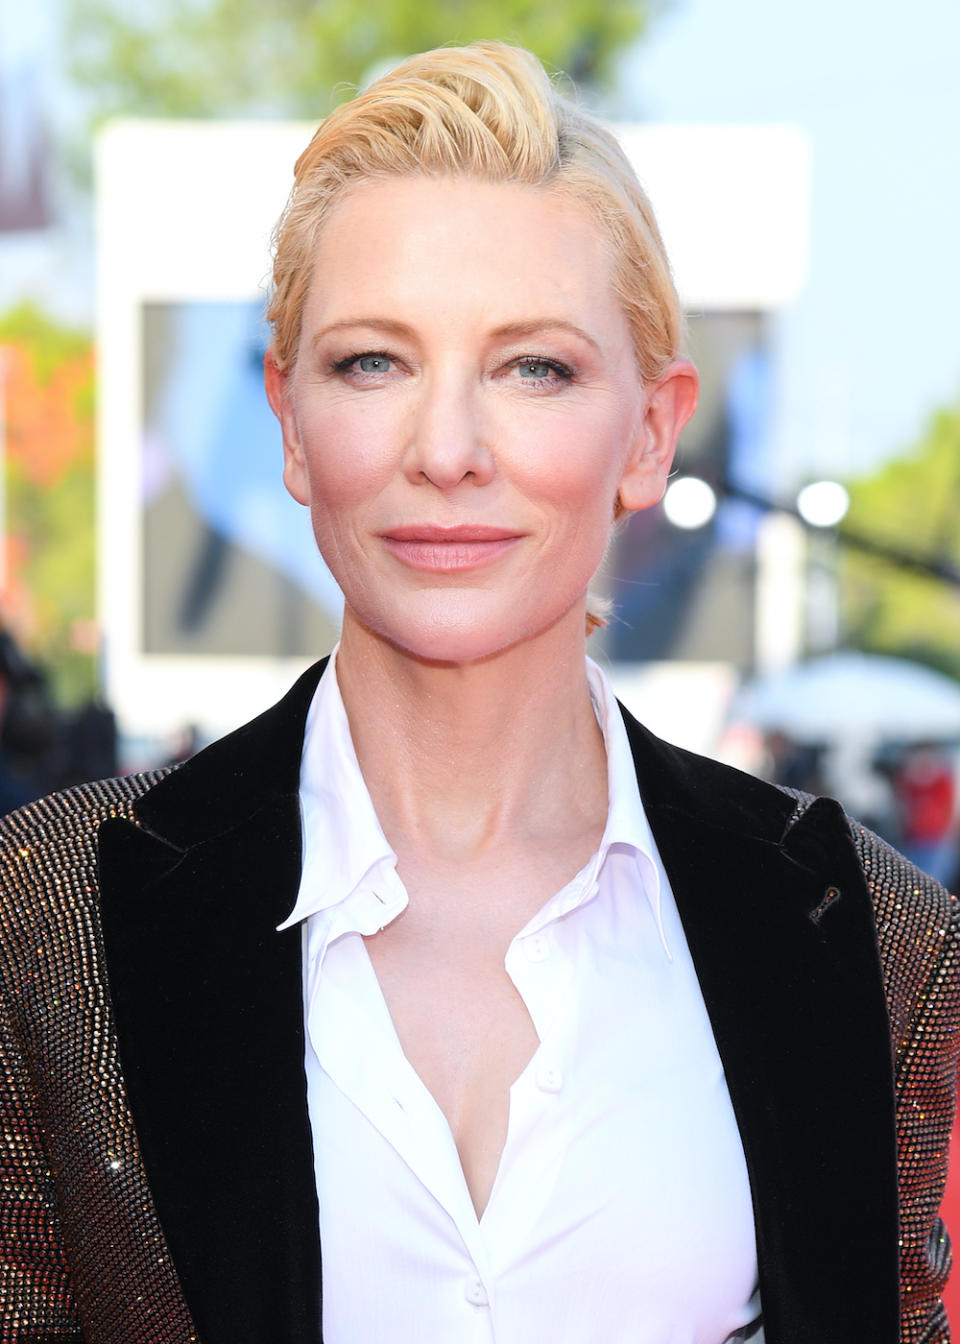 Cate Blanchett walks the red carpet ahead of the movie 